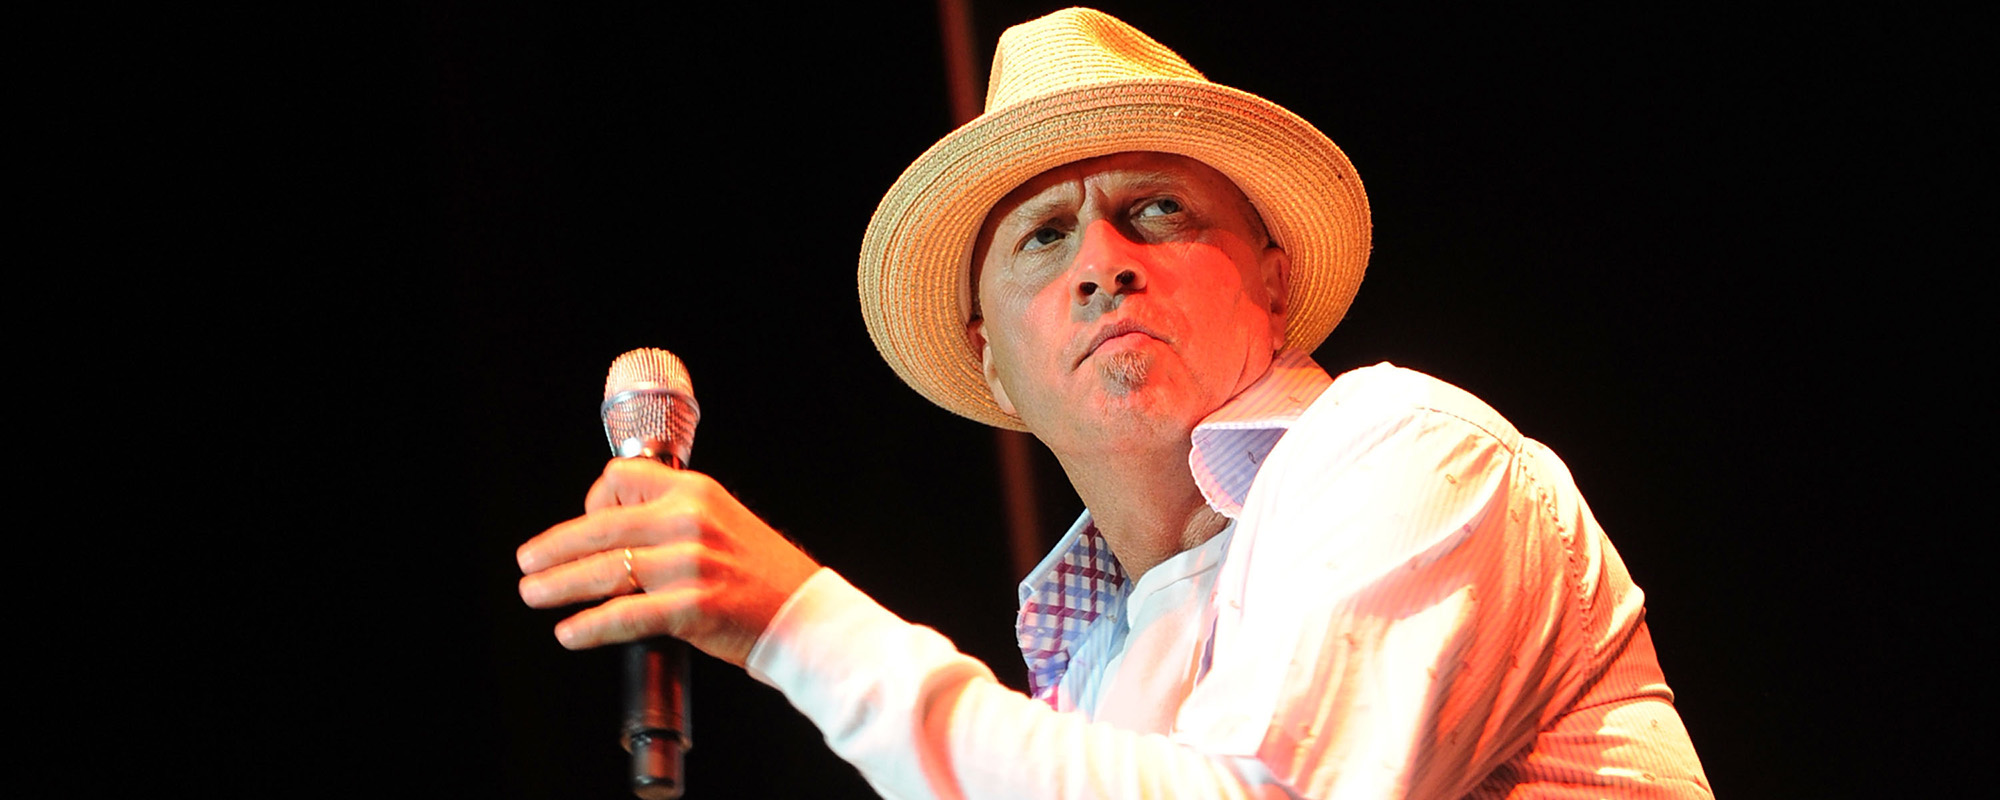 Sawyer Brown’s Mark Miller Quips Upcoming Memoir “Gonna Be Best Seller of All Time—Behind Bible”